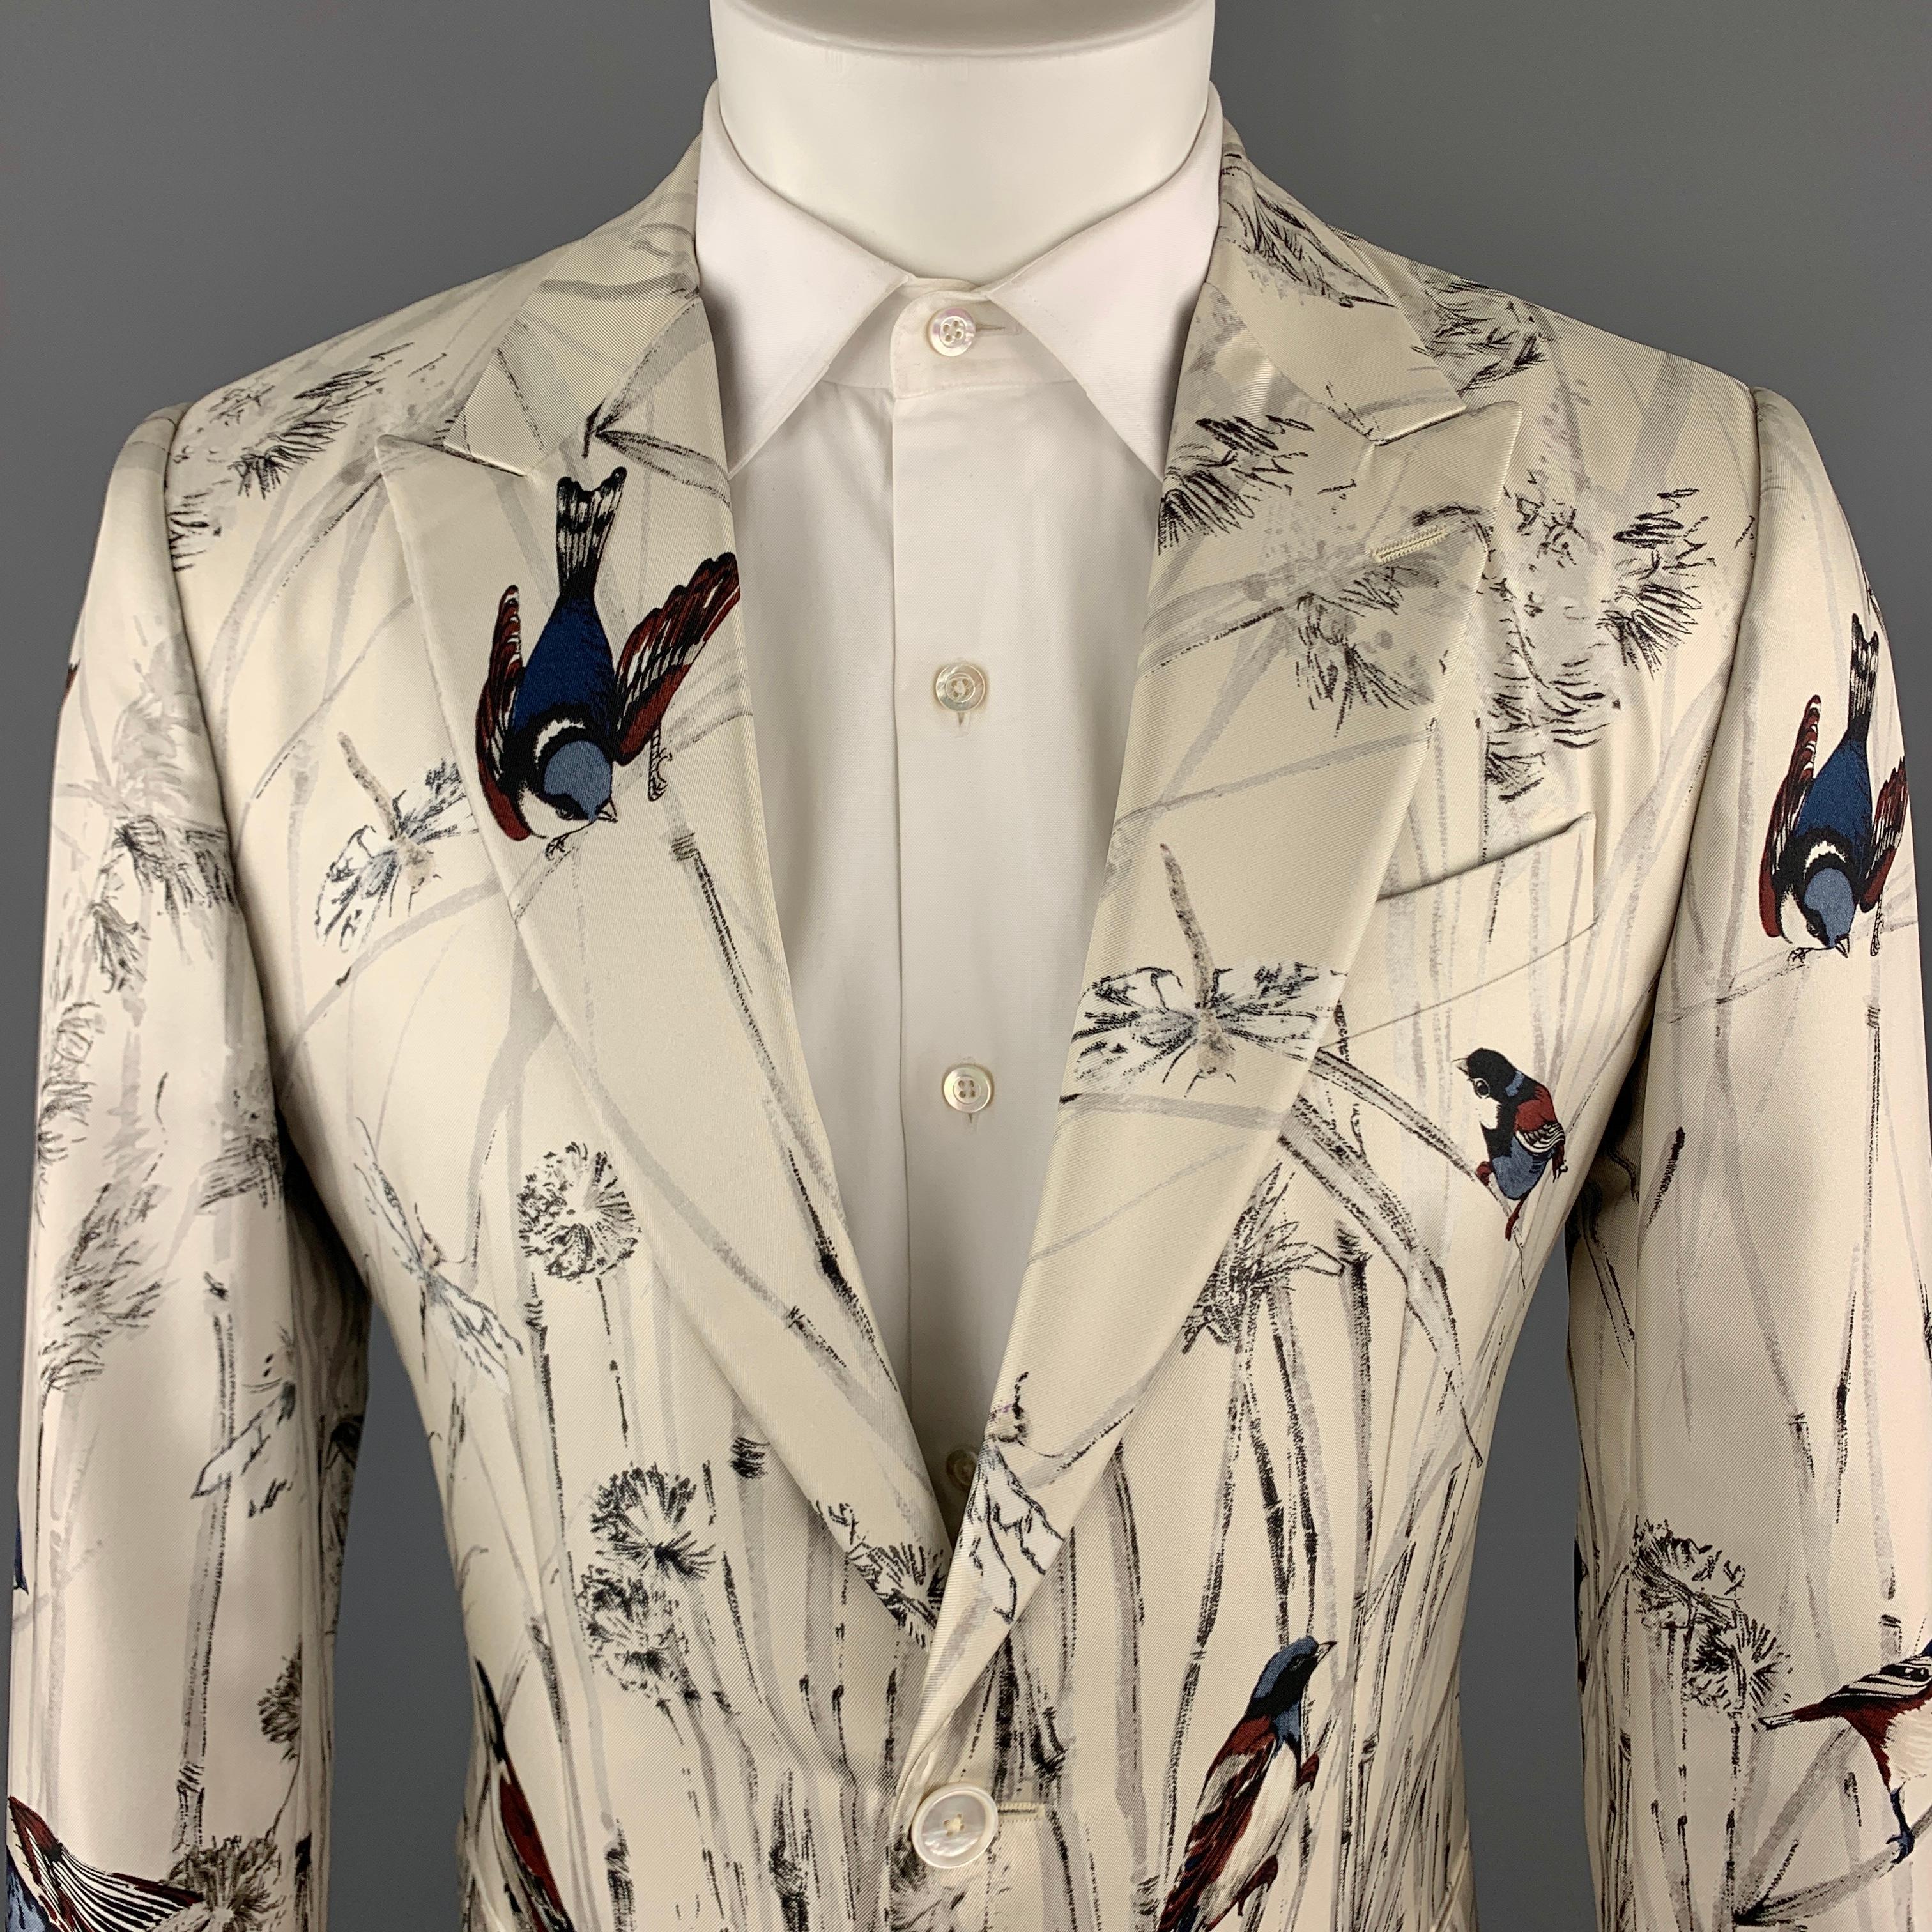 DOLCE & GABBANA Sport Coat comes in an ivory birds print silk material, with a peak lapel, slit pockets, two buttons at closure, single breasted, functional buttons at cuffs, and a single vent at back. Made in Italy. 

New with Tags.
Marked: IT